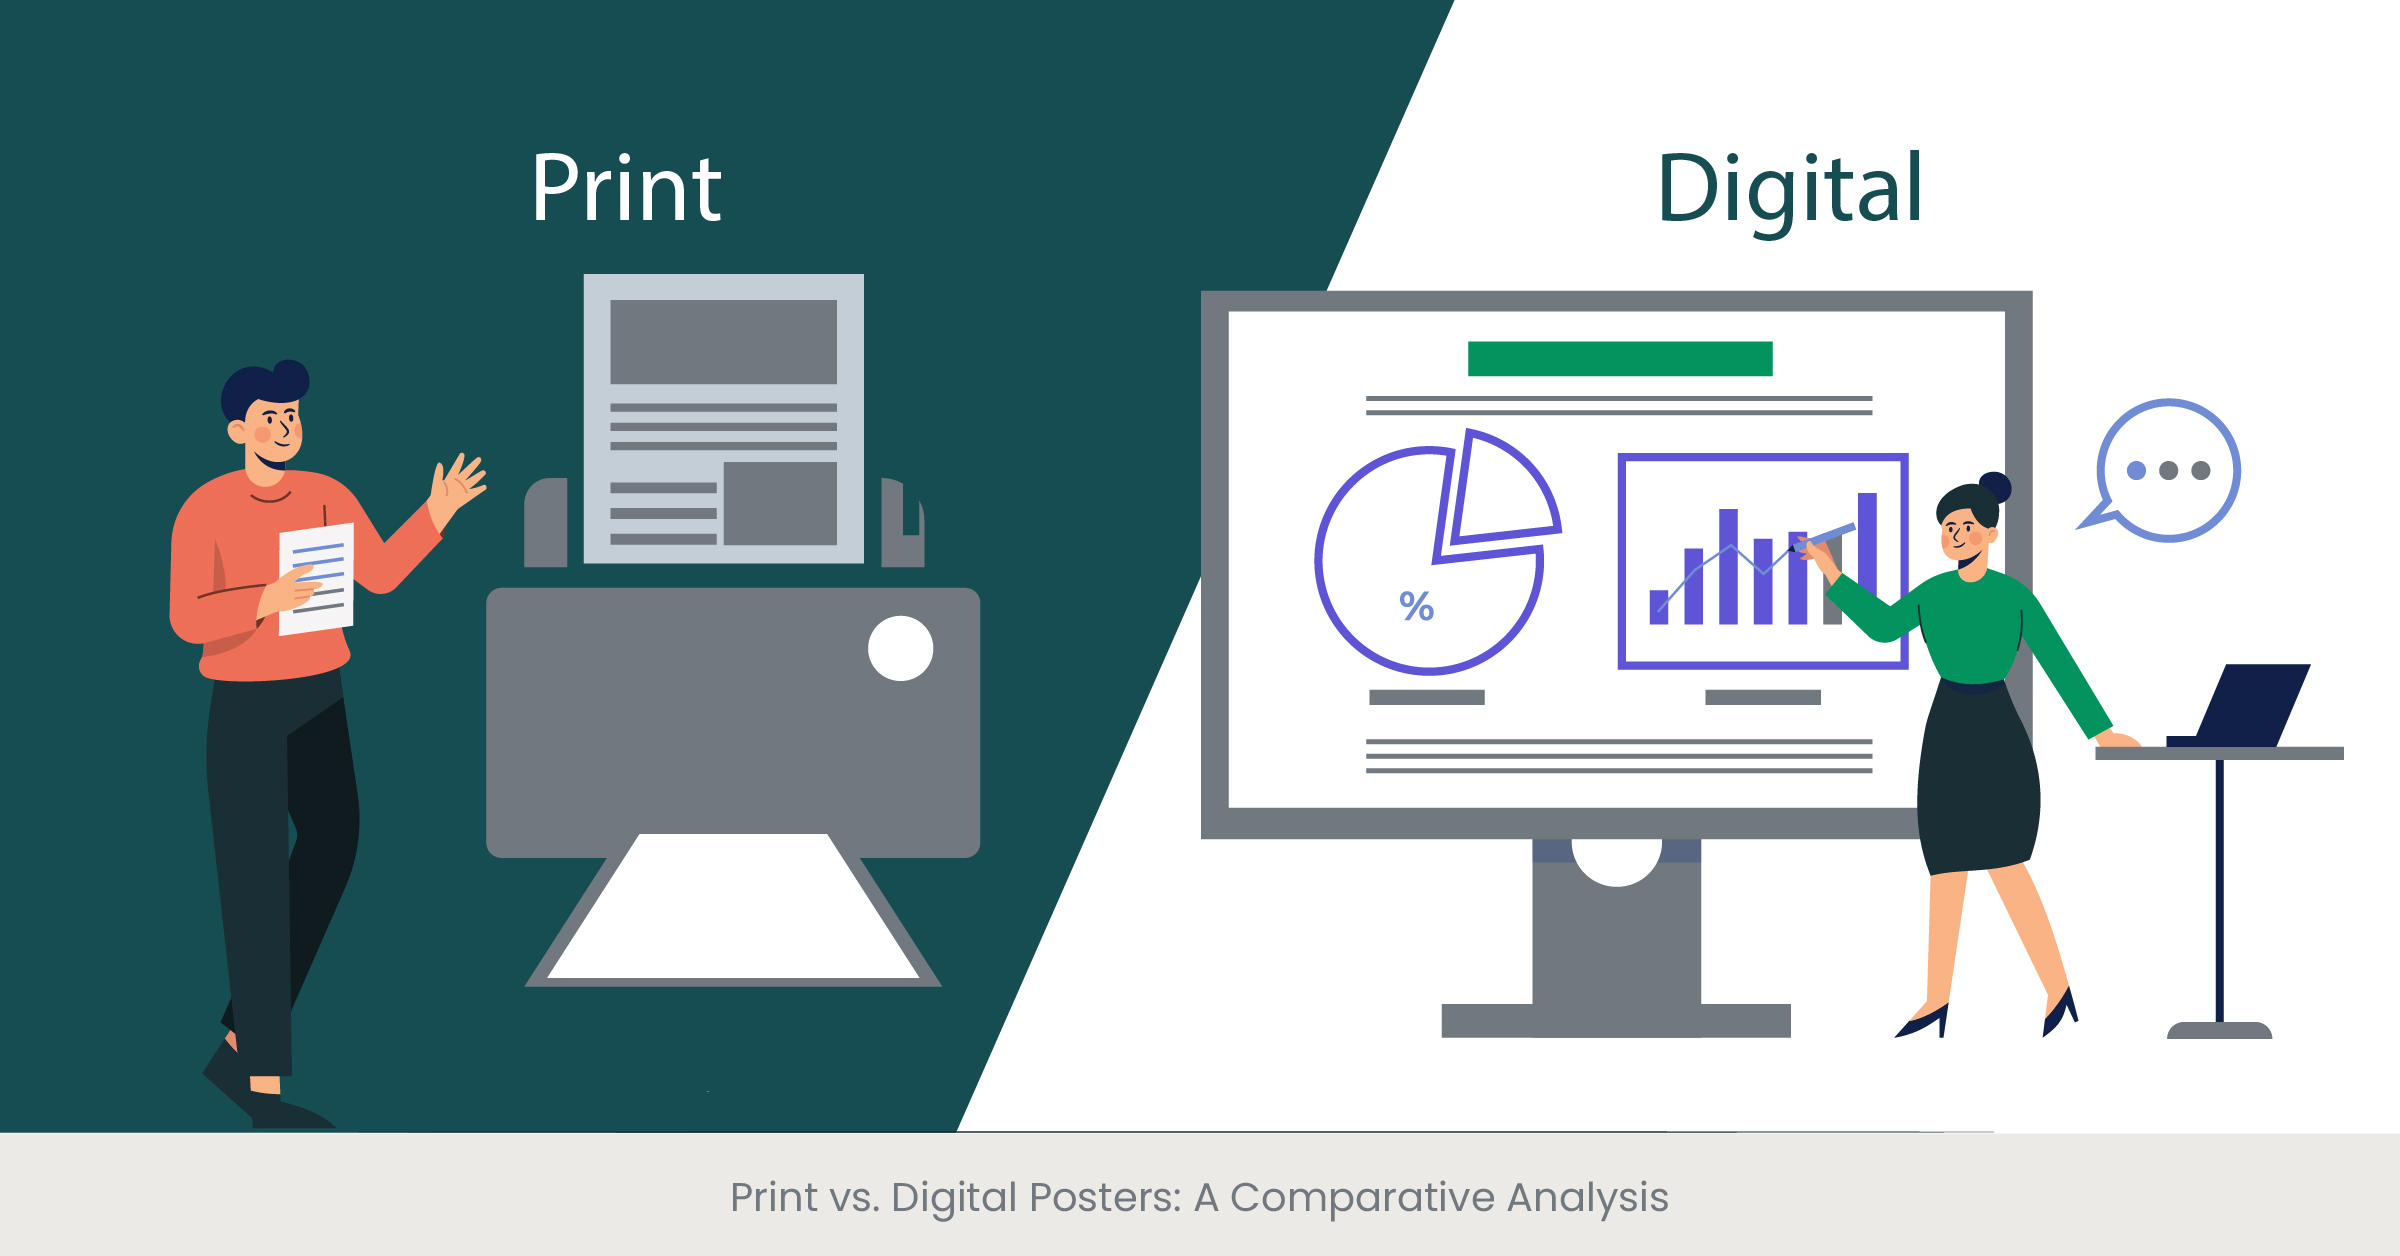 Print vs. Digital Posters: A Comparative Analysis